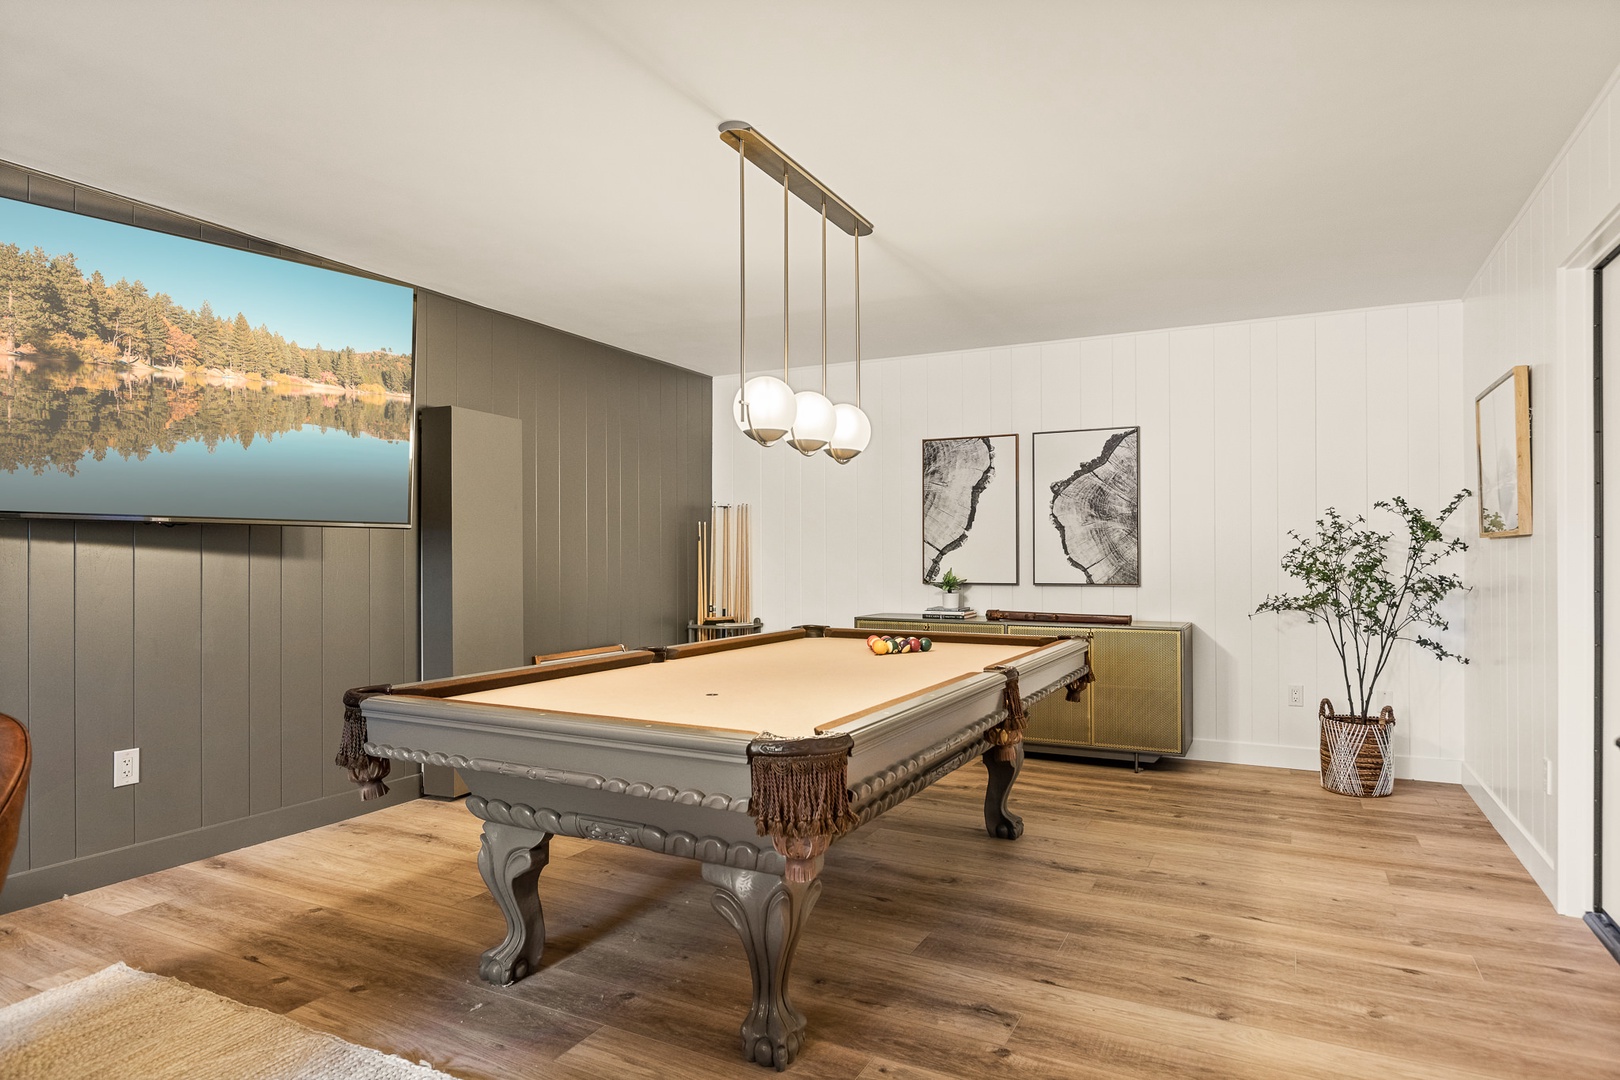 Game room with billiards, TV, and wetbar